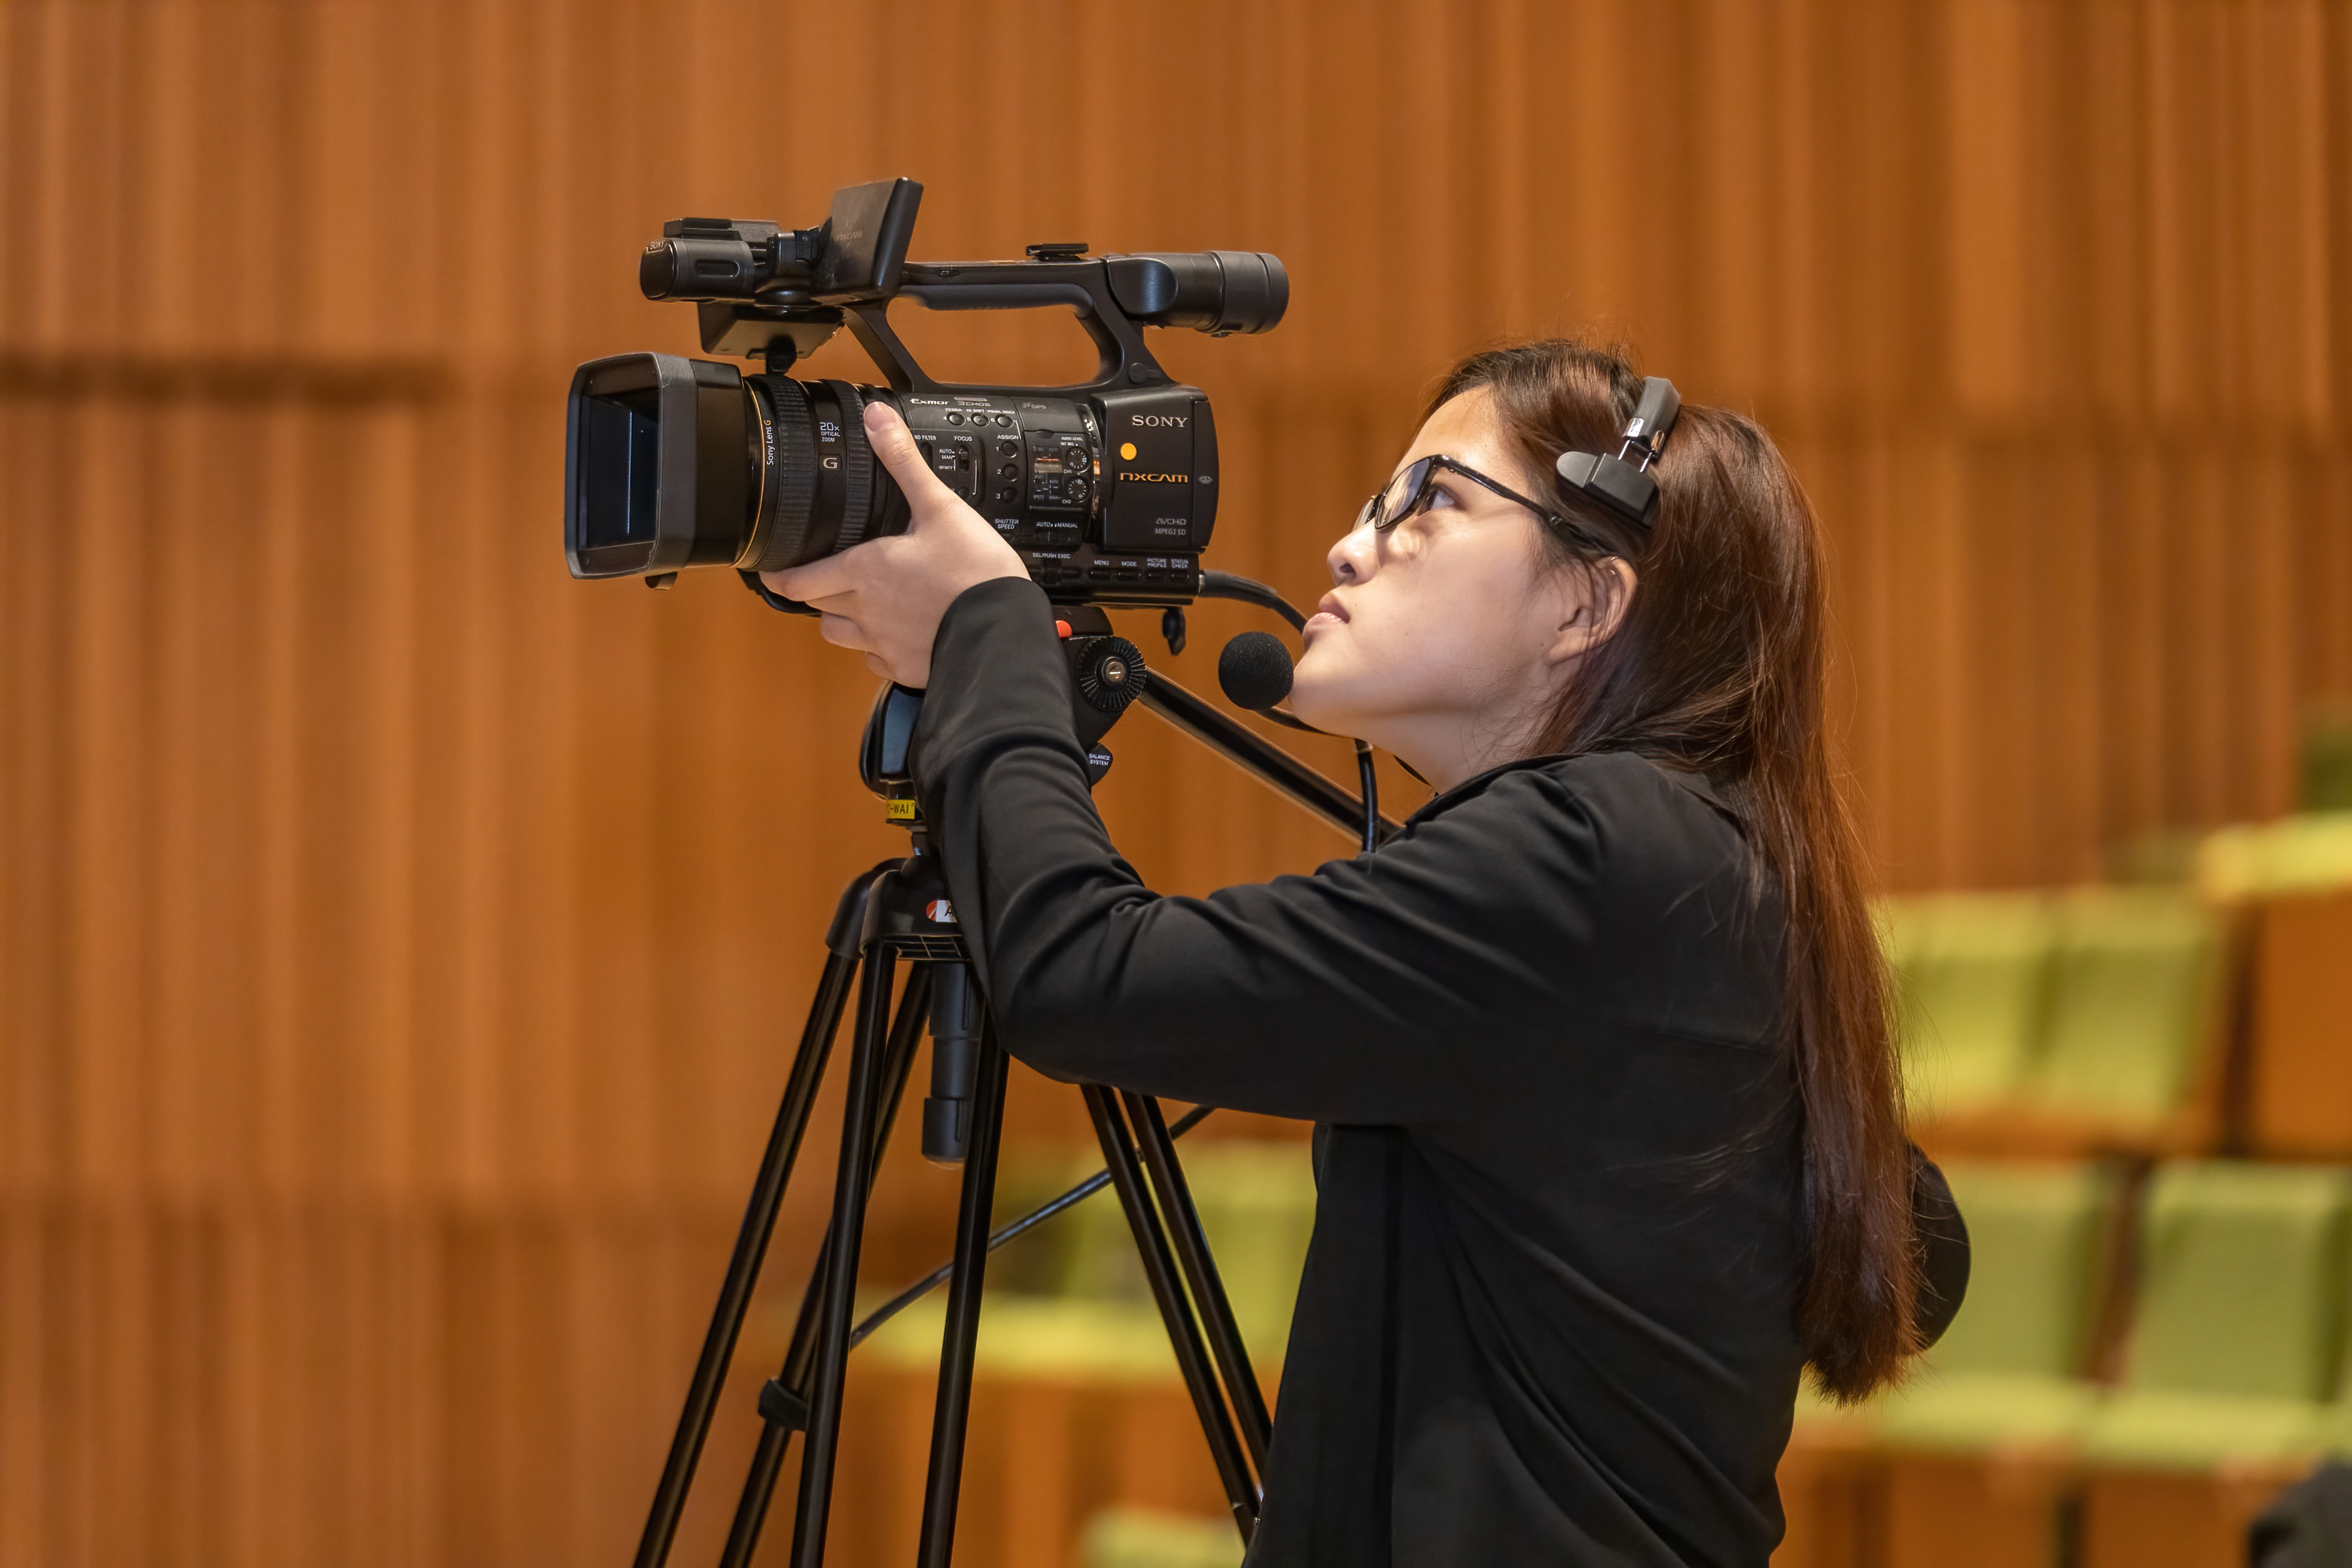 HKUST student is controlling a video camera